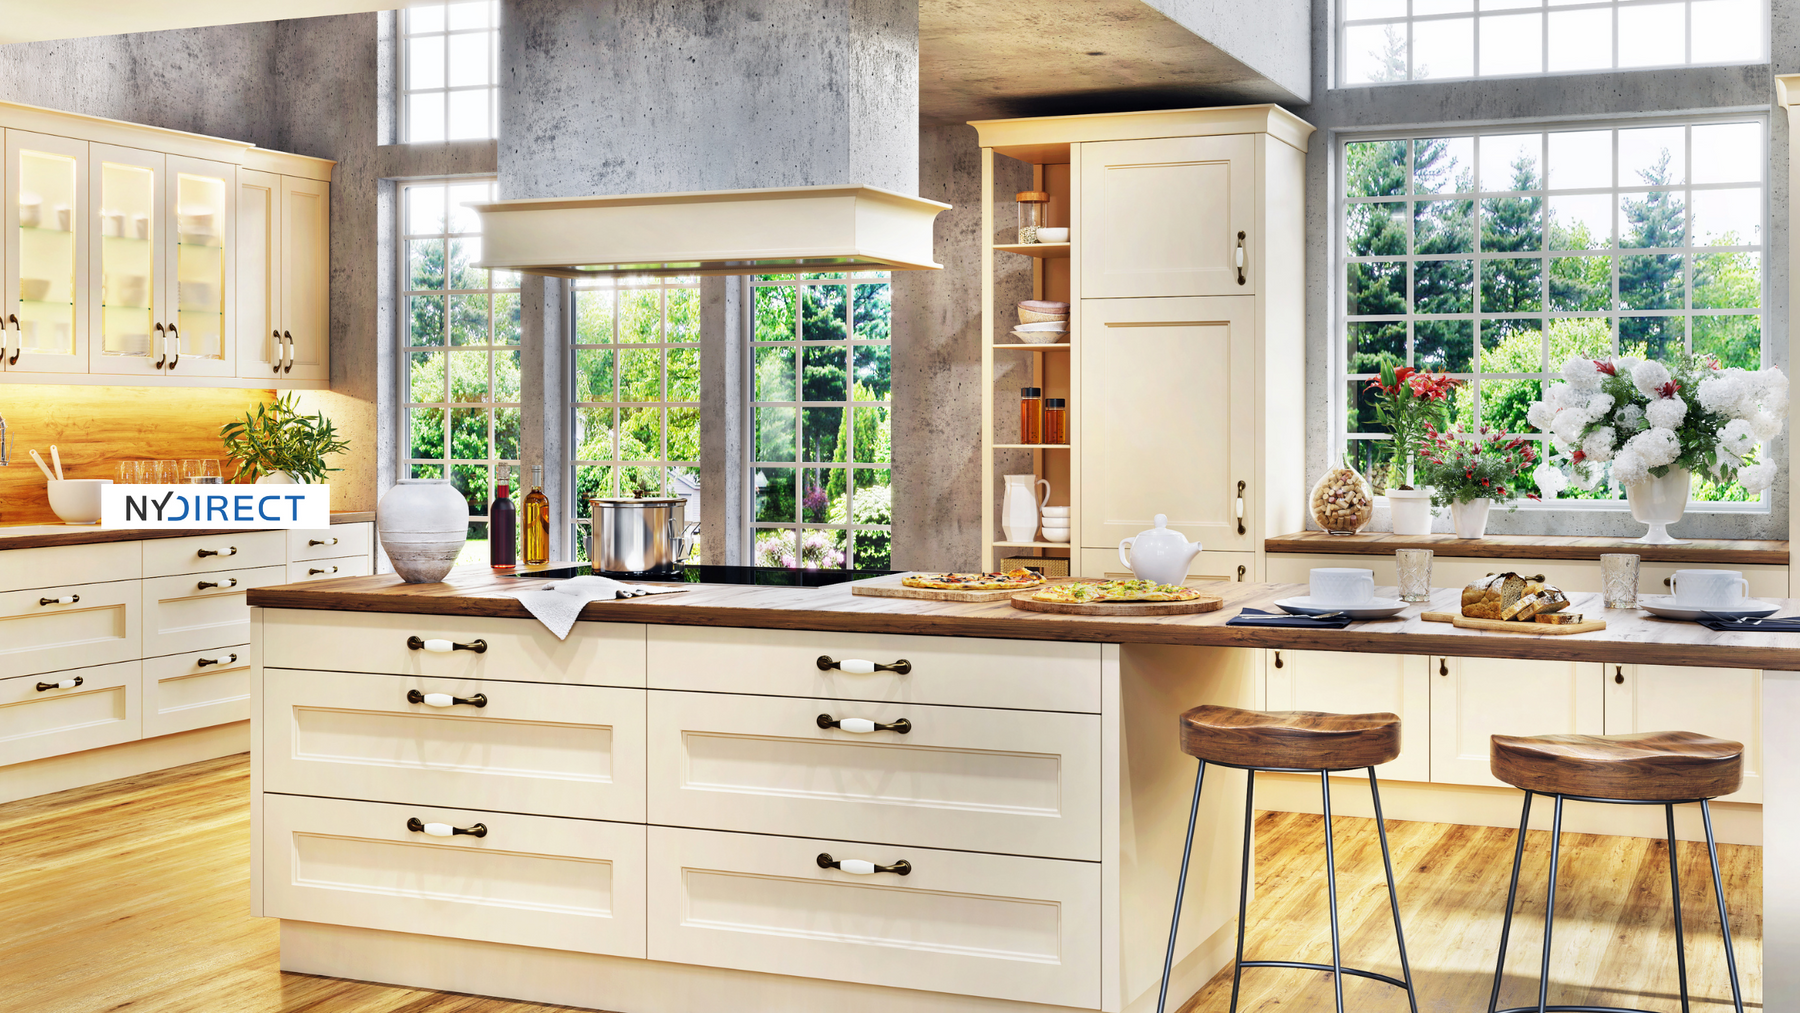 Kitchen Remodeling on a Budget: Transform Your Space with Style and Savings